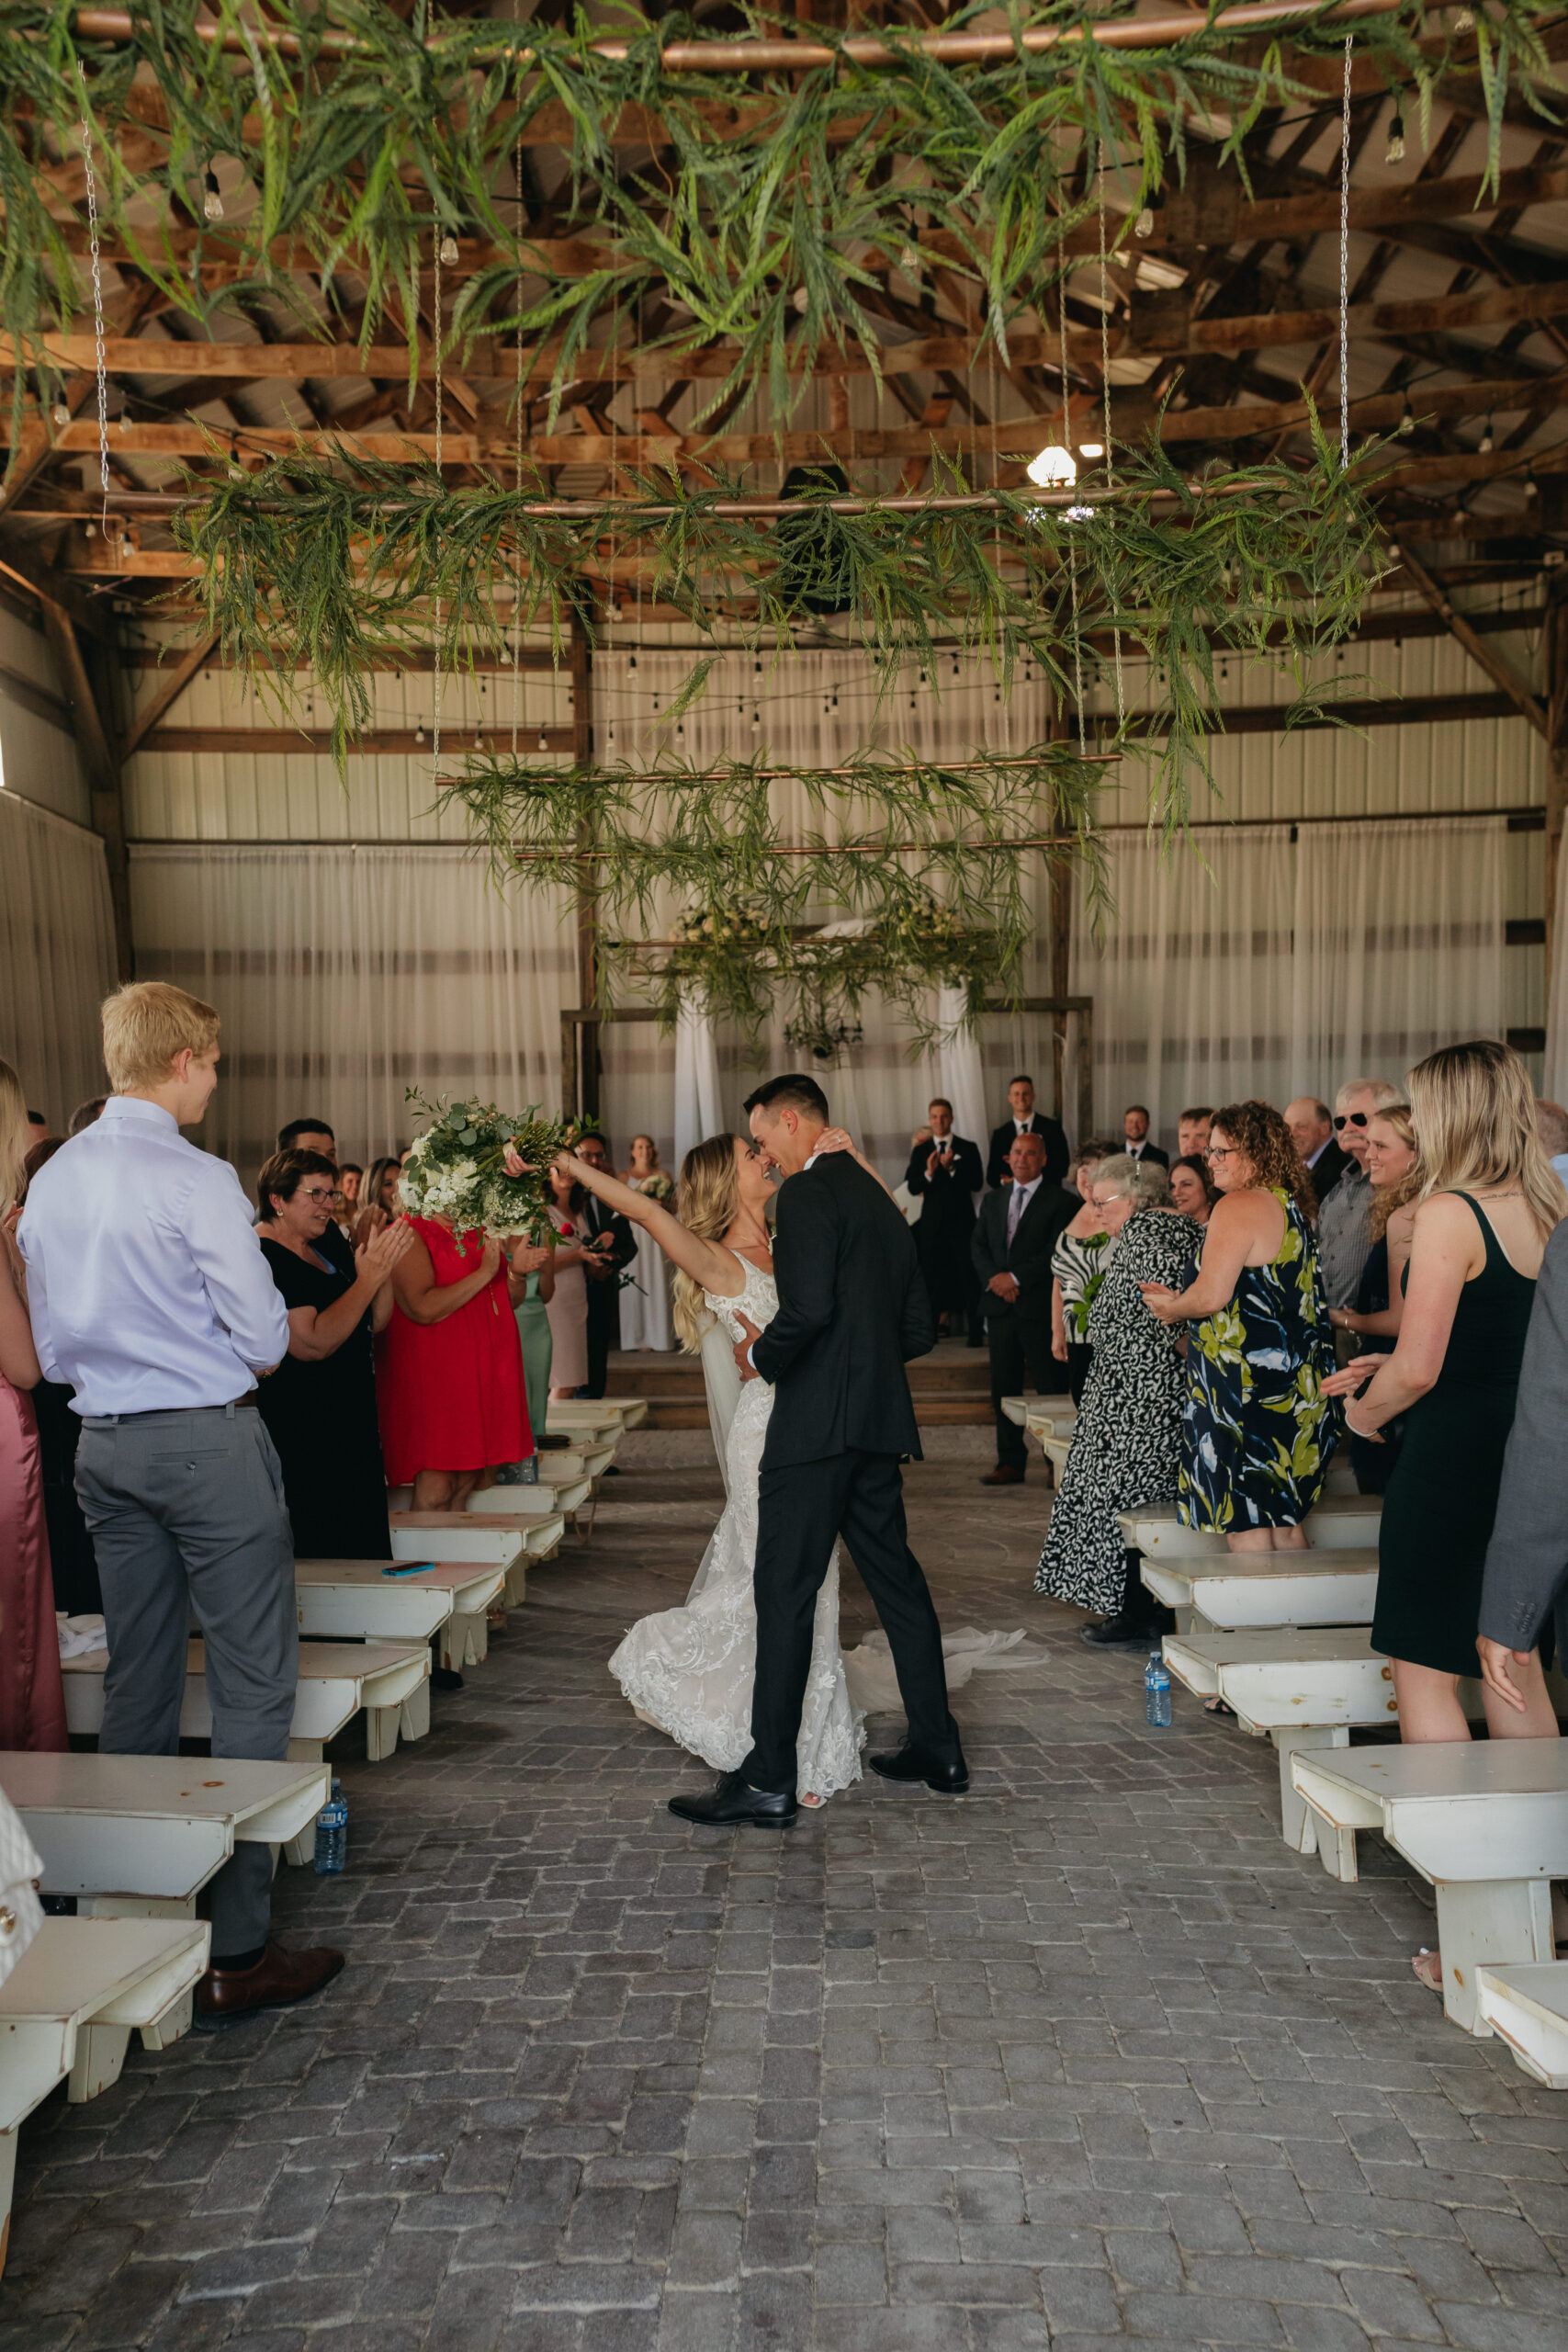 Newlyweds kissing down the aisle and cheering